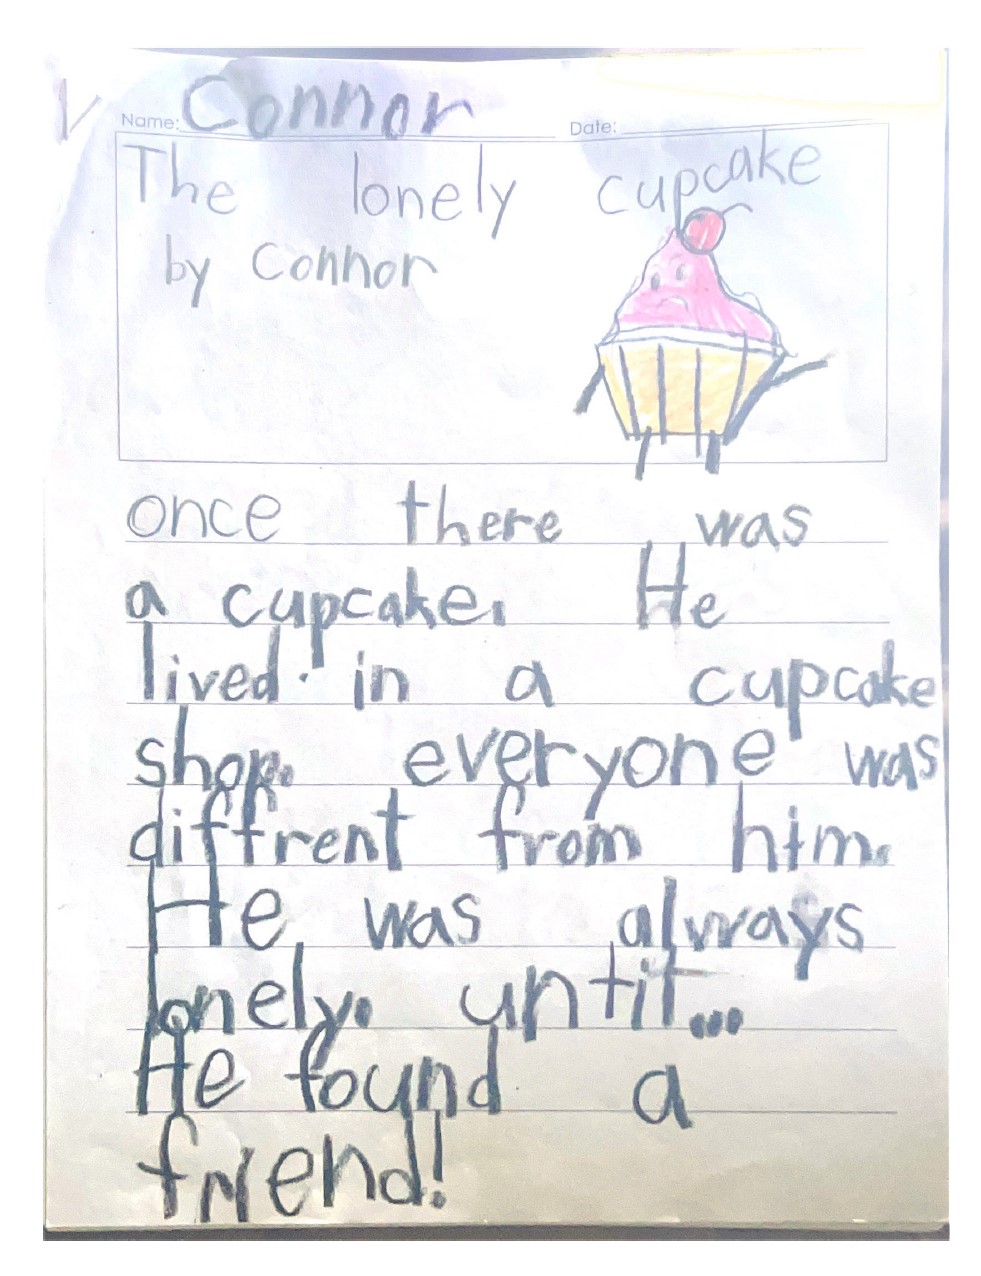 The lonely cupcake by Connor